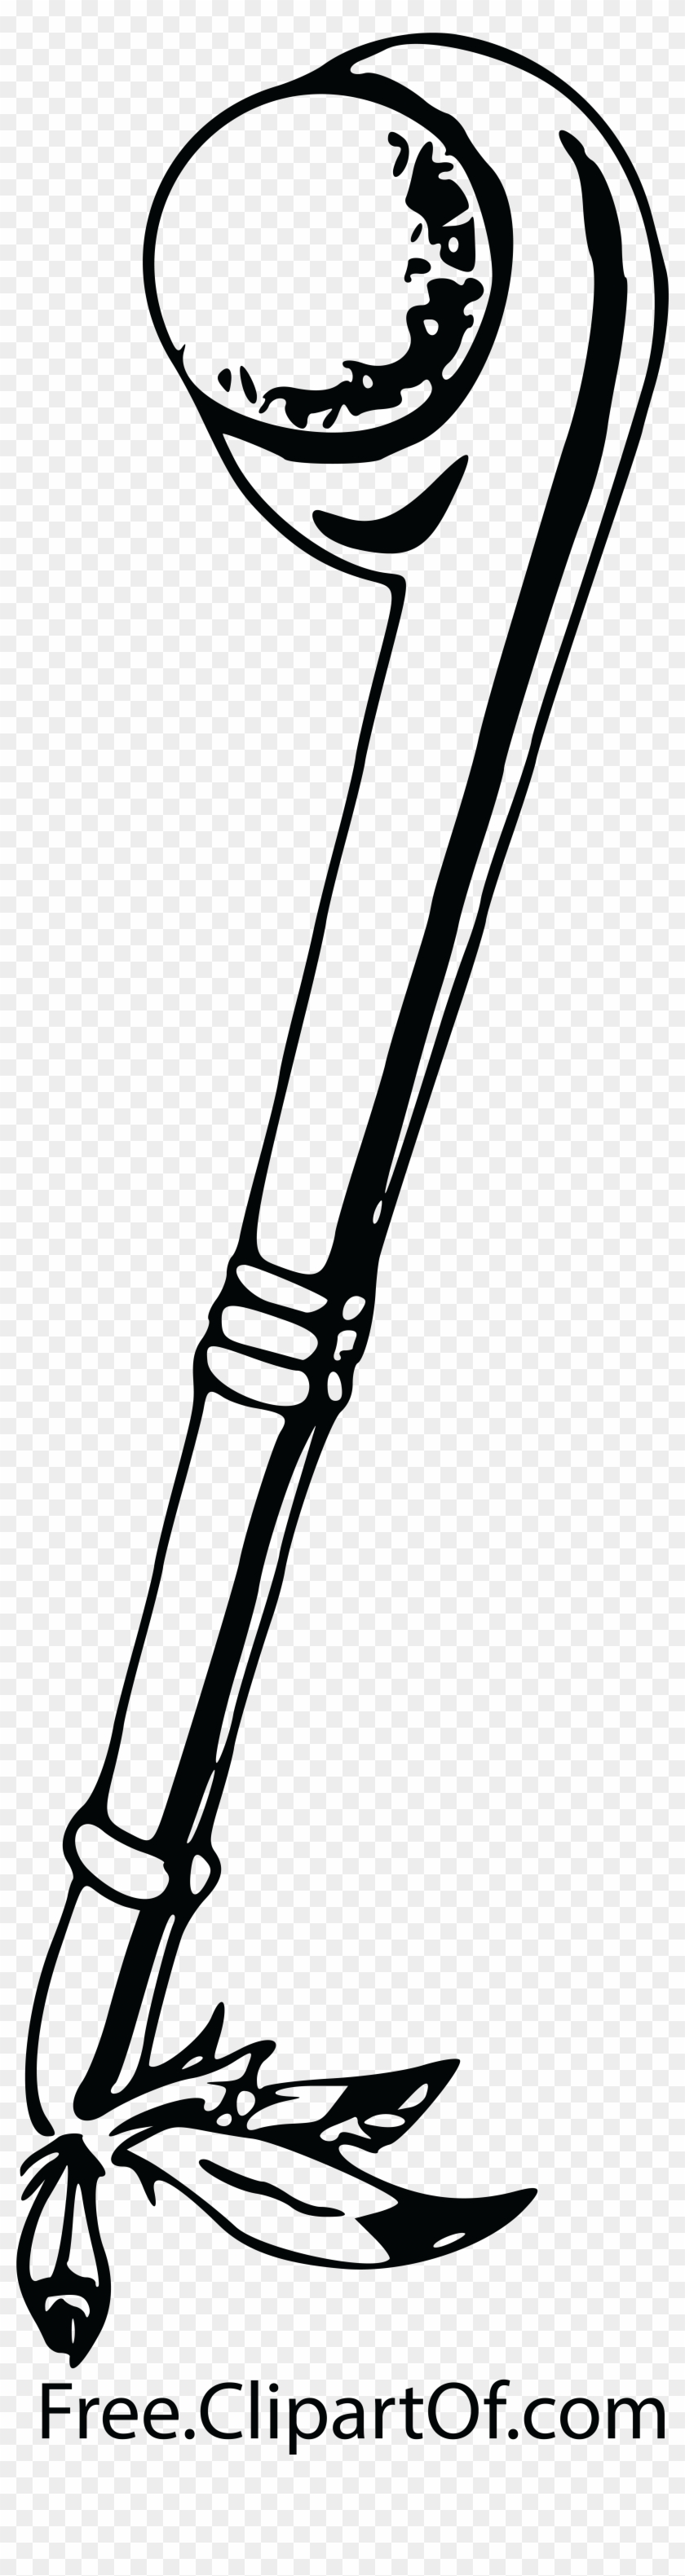 Free Clipart Of A Black And White Tomahawk With Feathers - Free Clipart Of A Black And White Tomahawk With Feathers #563595